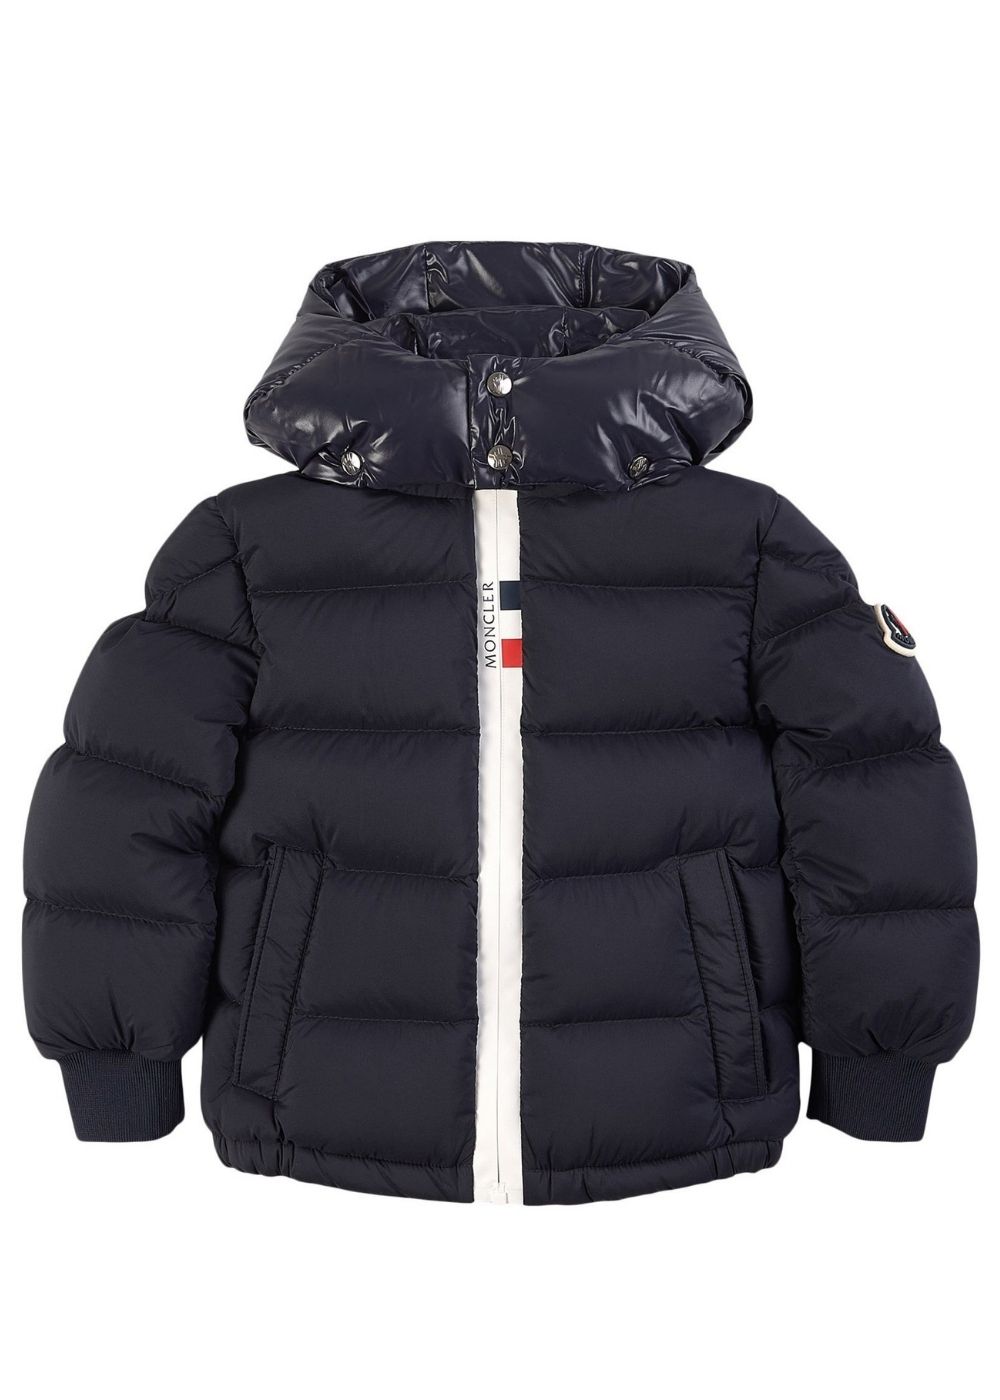 Featured image for “MONCLER HALE”